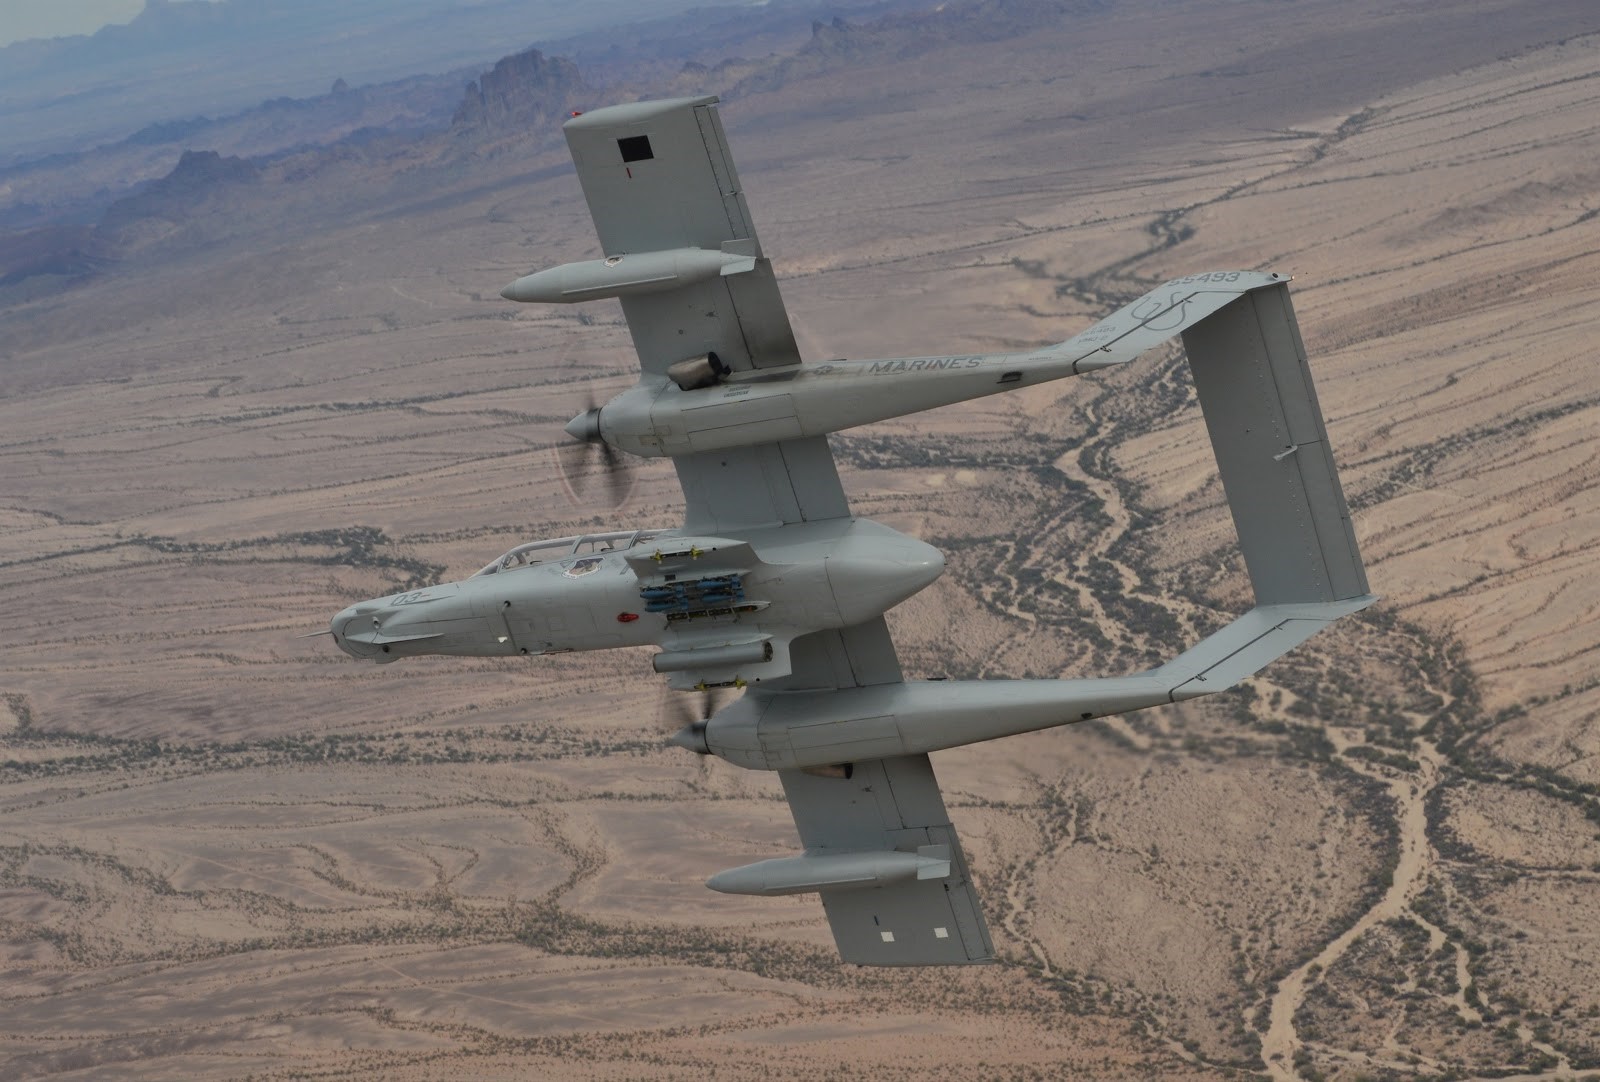 Blue Air Training Acquires OV-10 Broncos to Support JTAC Training Missions